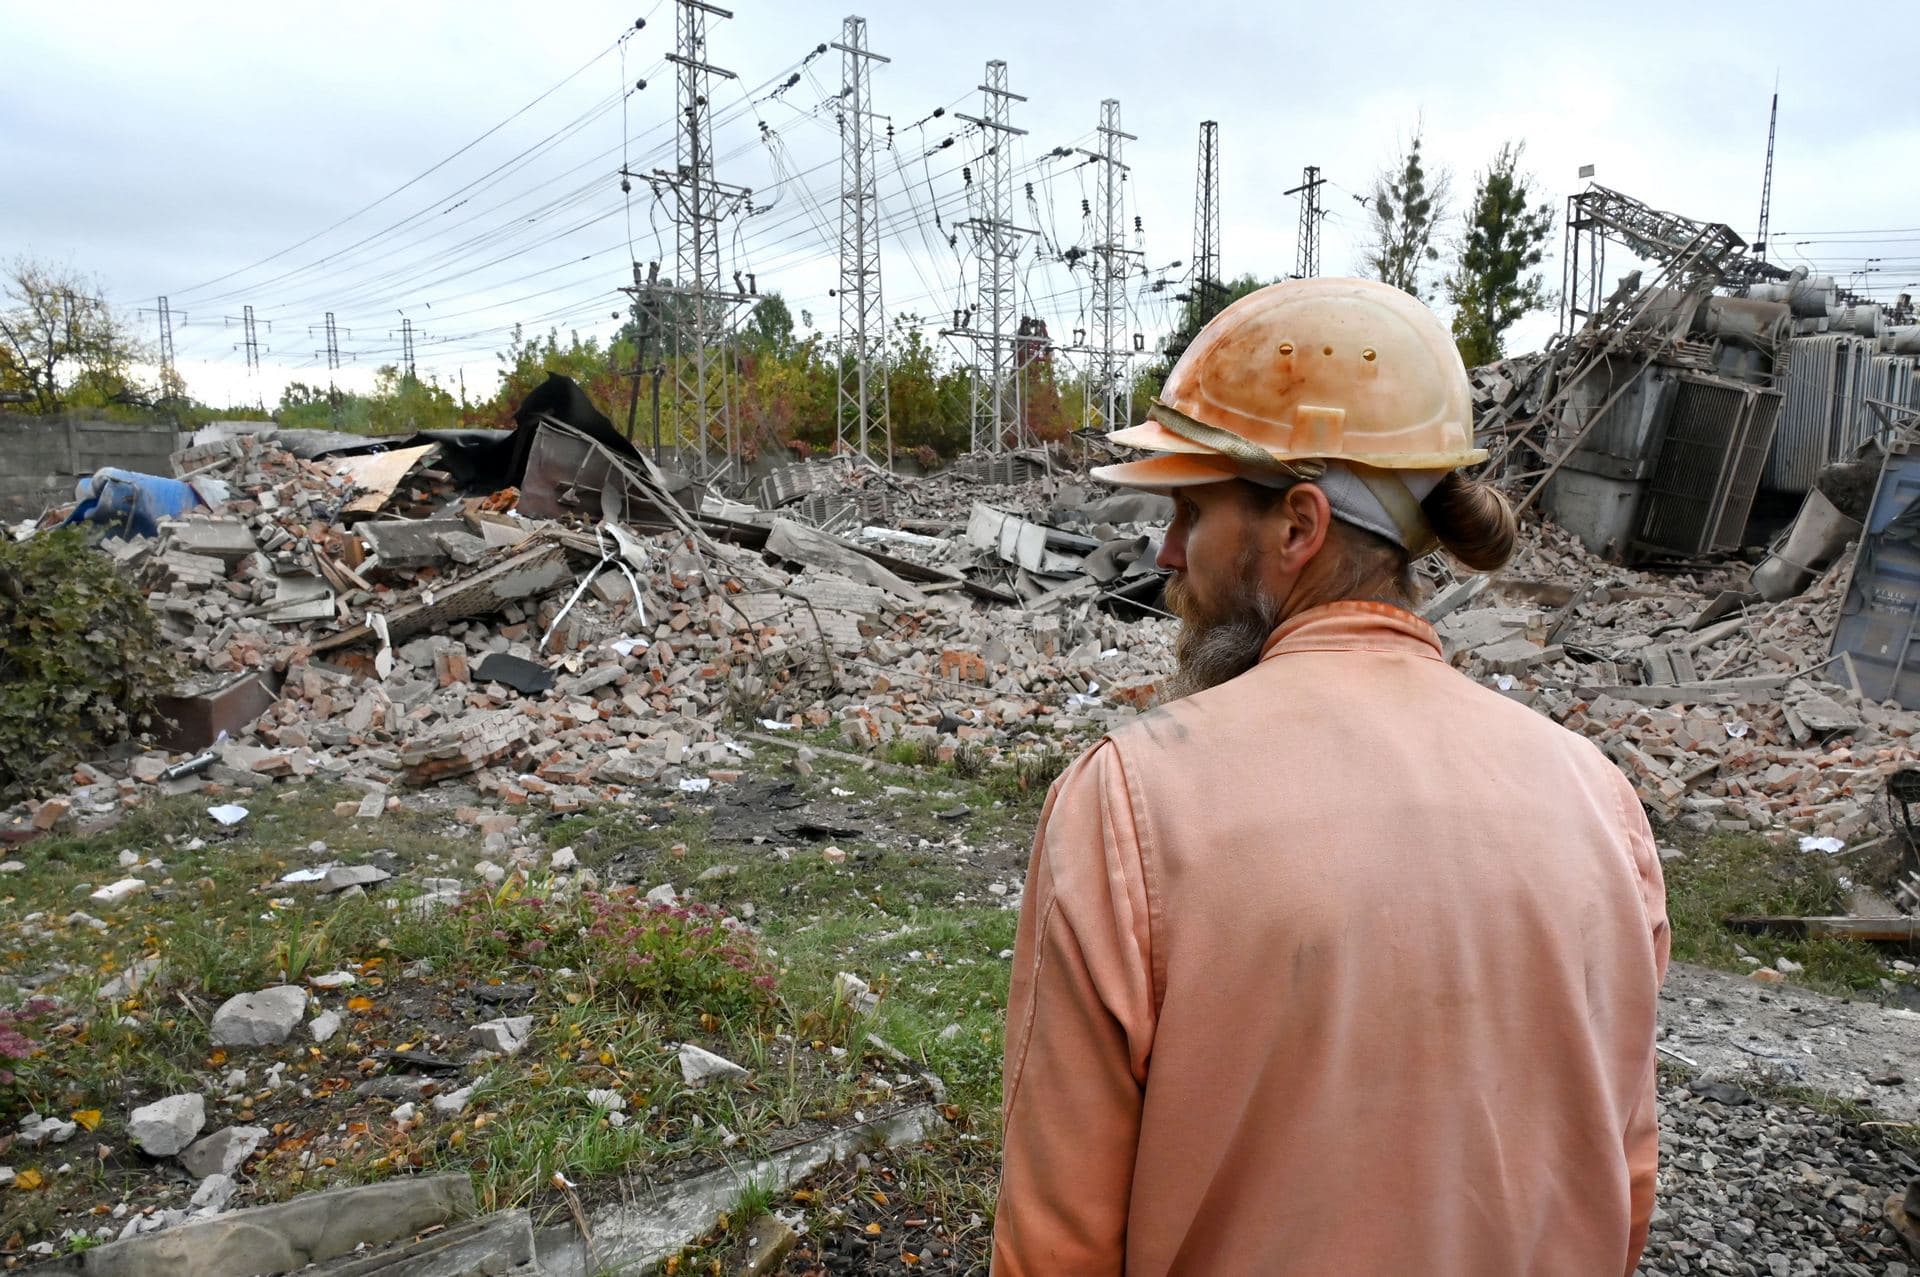 An employee of an energy company inspects an electrical transformer substation destroyed by Russian missile strikes on the outskirts of Kharkiv